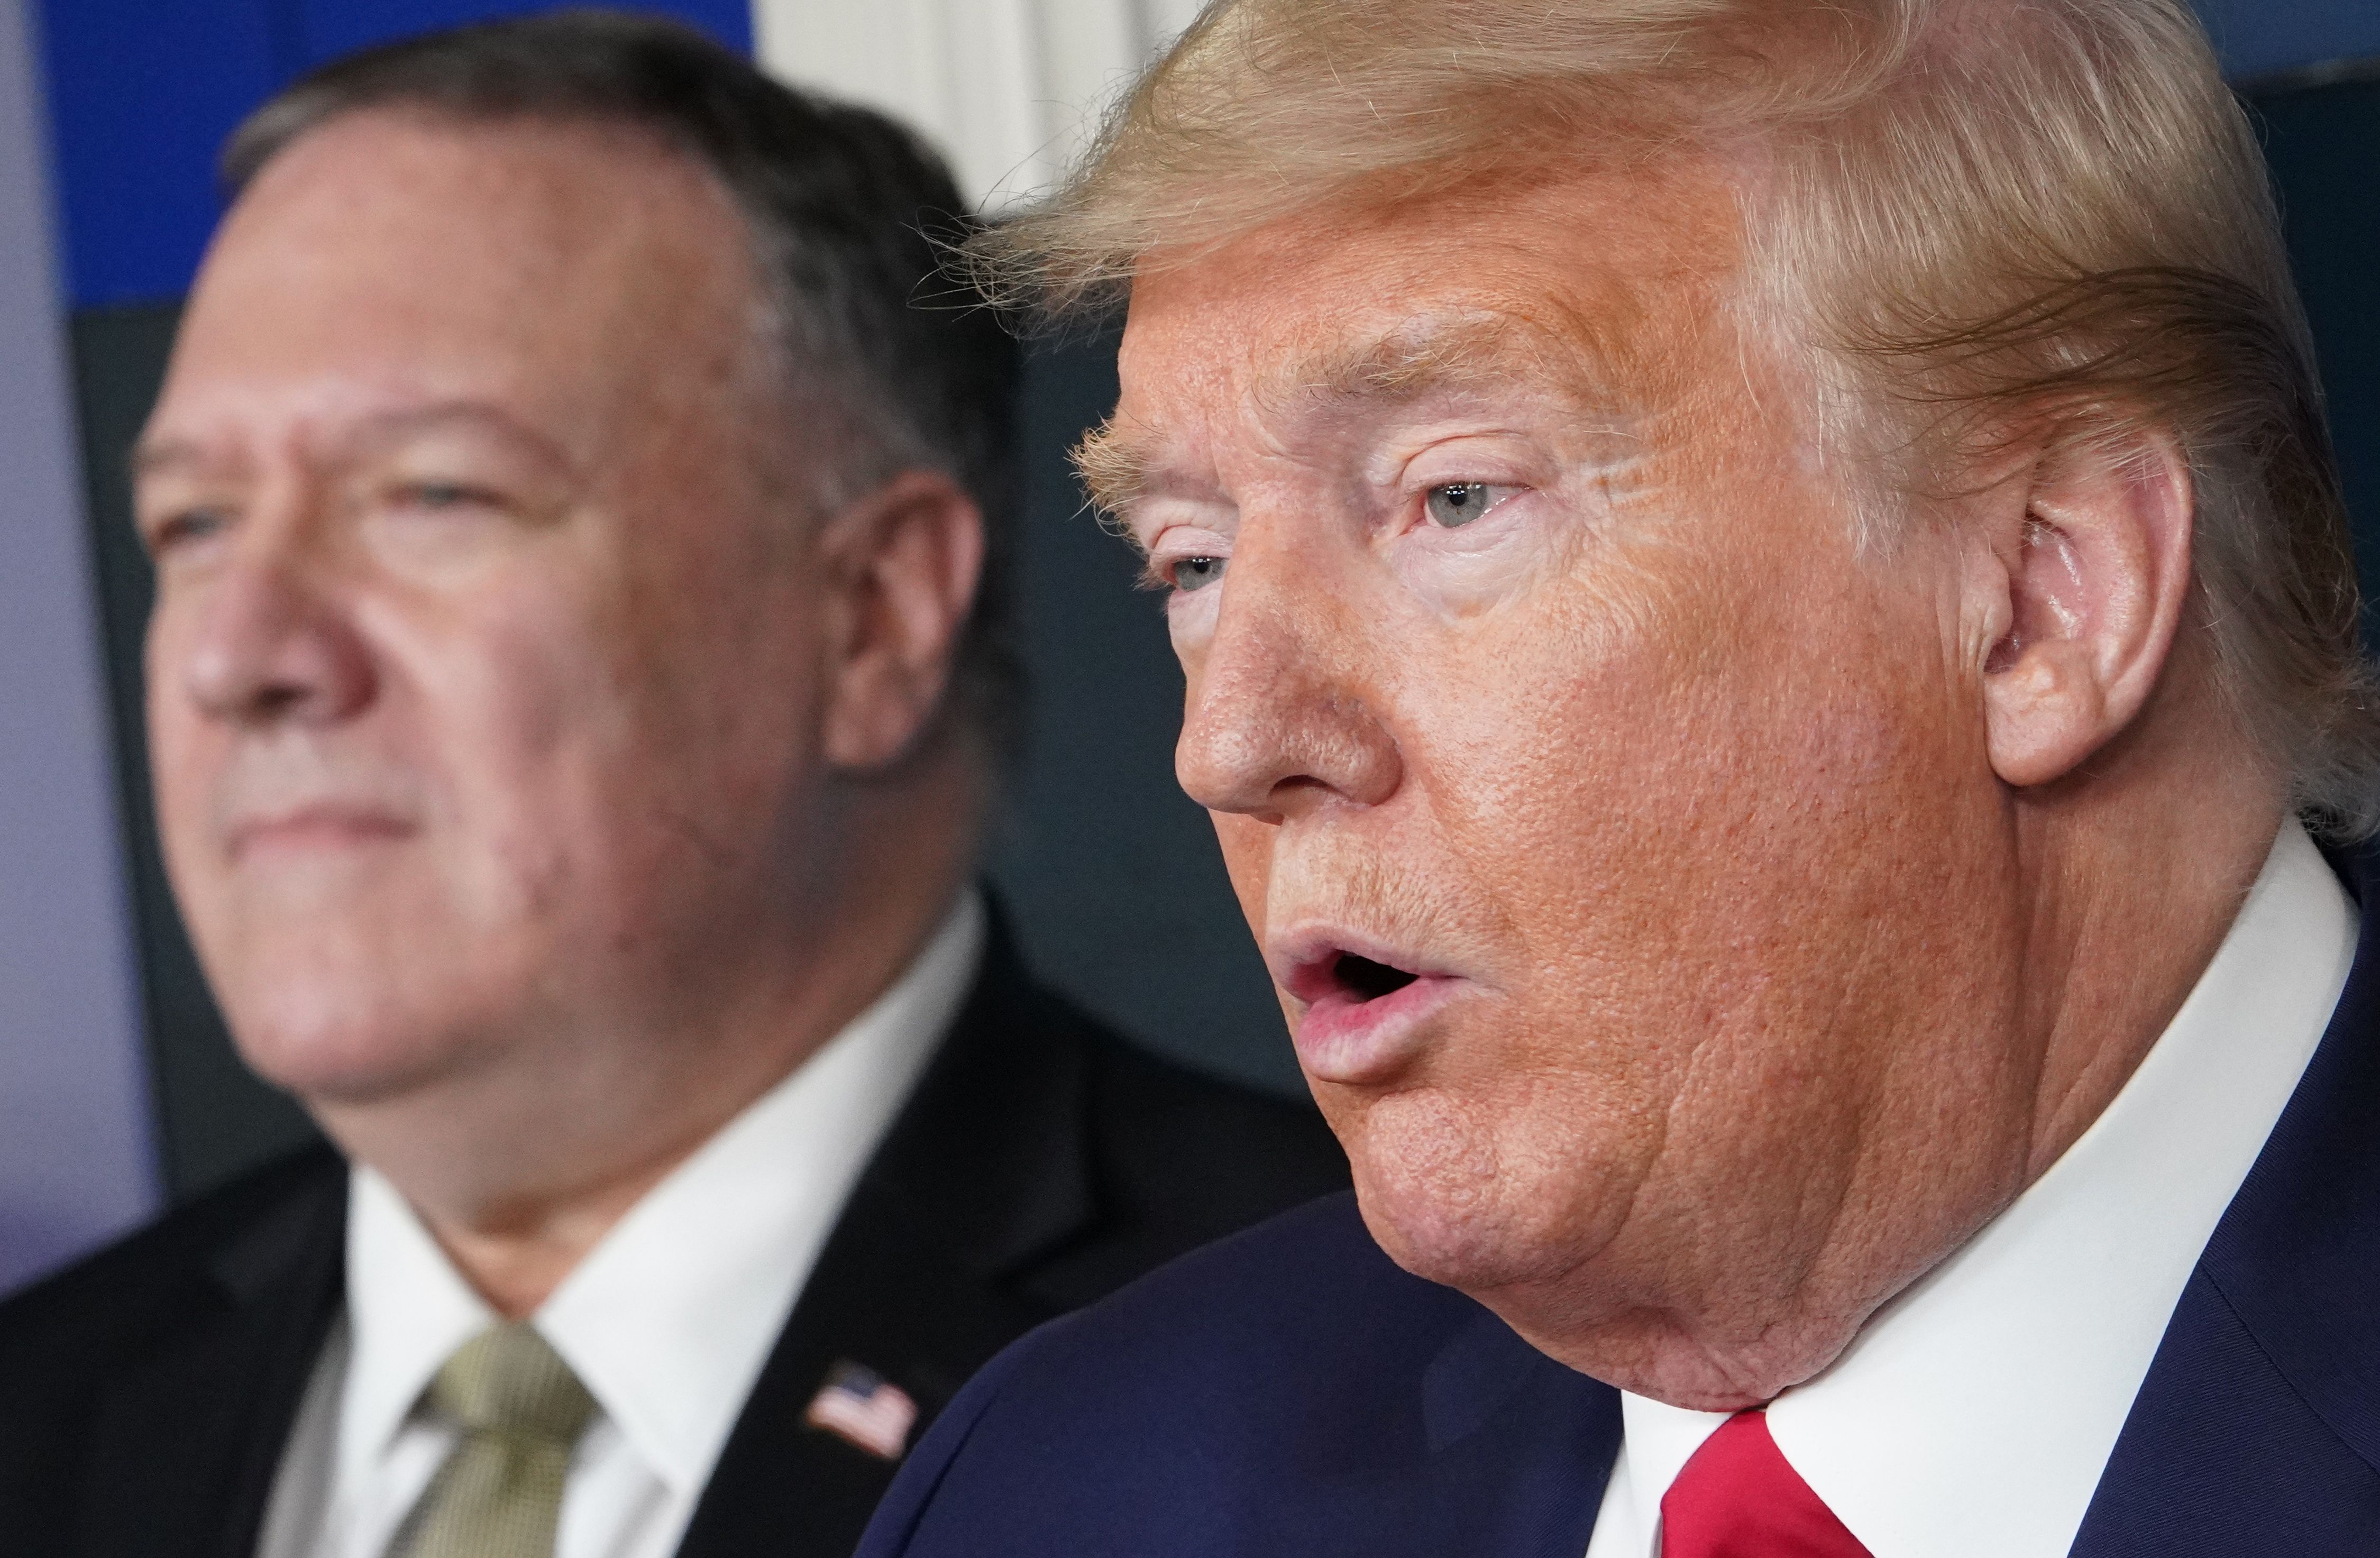 US Secretary of States Mike Pompeo watches US President Donald Trump speak during the daily briefing on the novel coronavirus, COVID-19, in the Brady Briefing Room at the White House on April 8, 2020, in Washington, DC. (Photo by MANDEL NGAN/AFP via Getty Images)